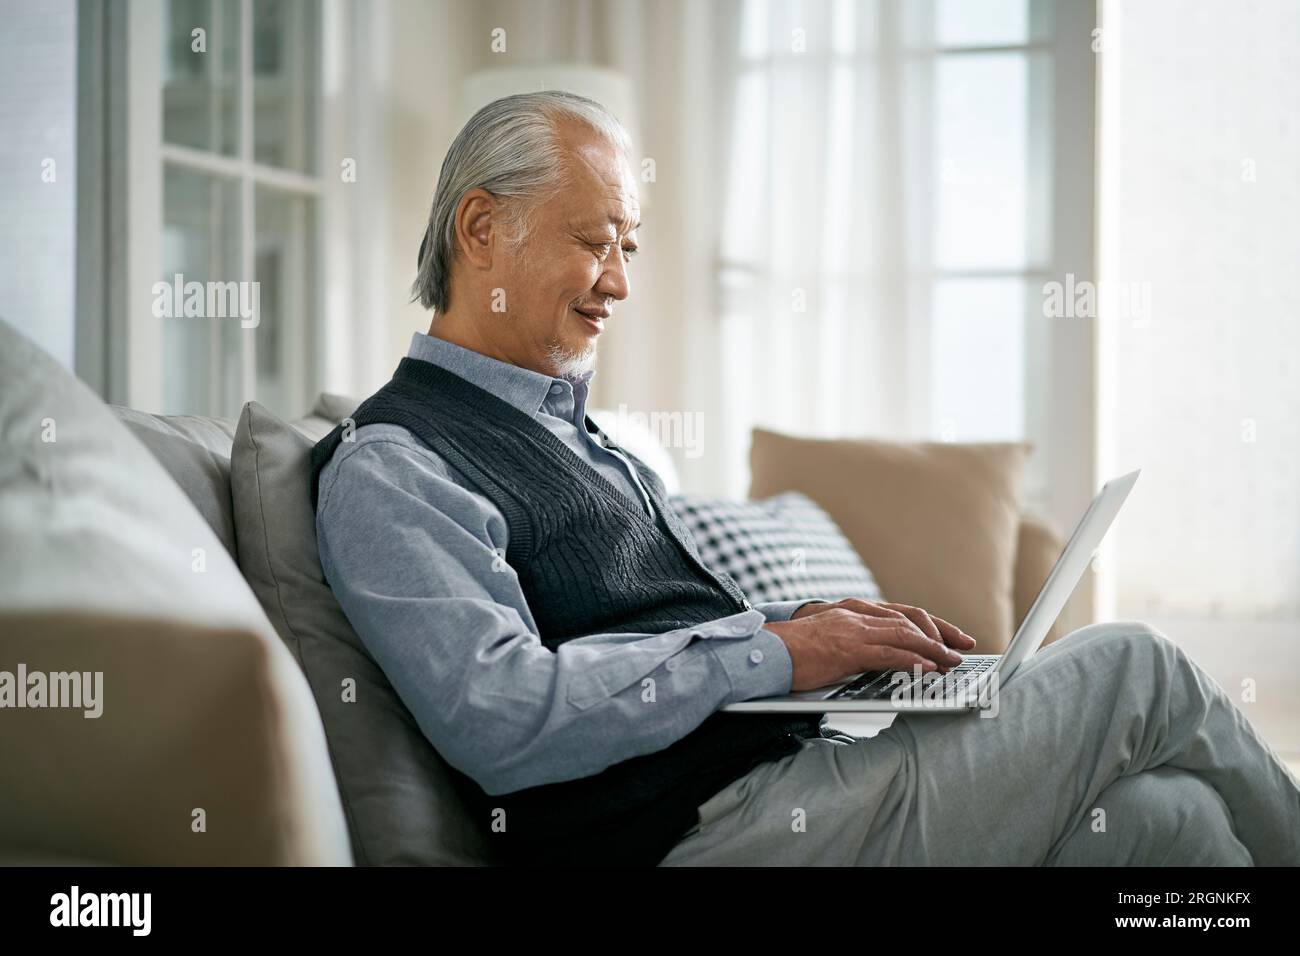 side view of senior asian man sitting on couch at home using laptop computer Stock Photo